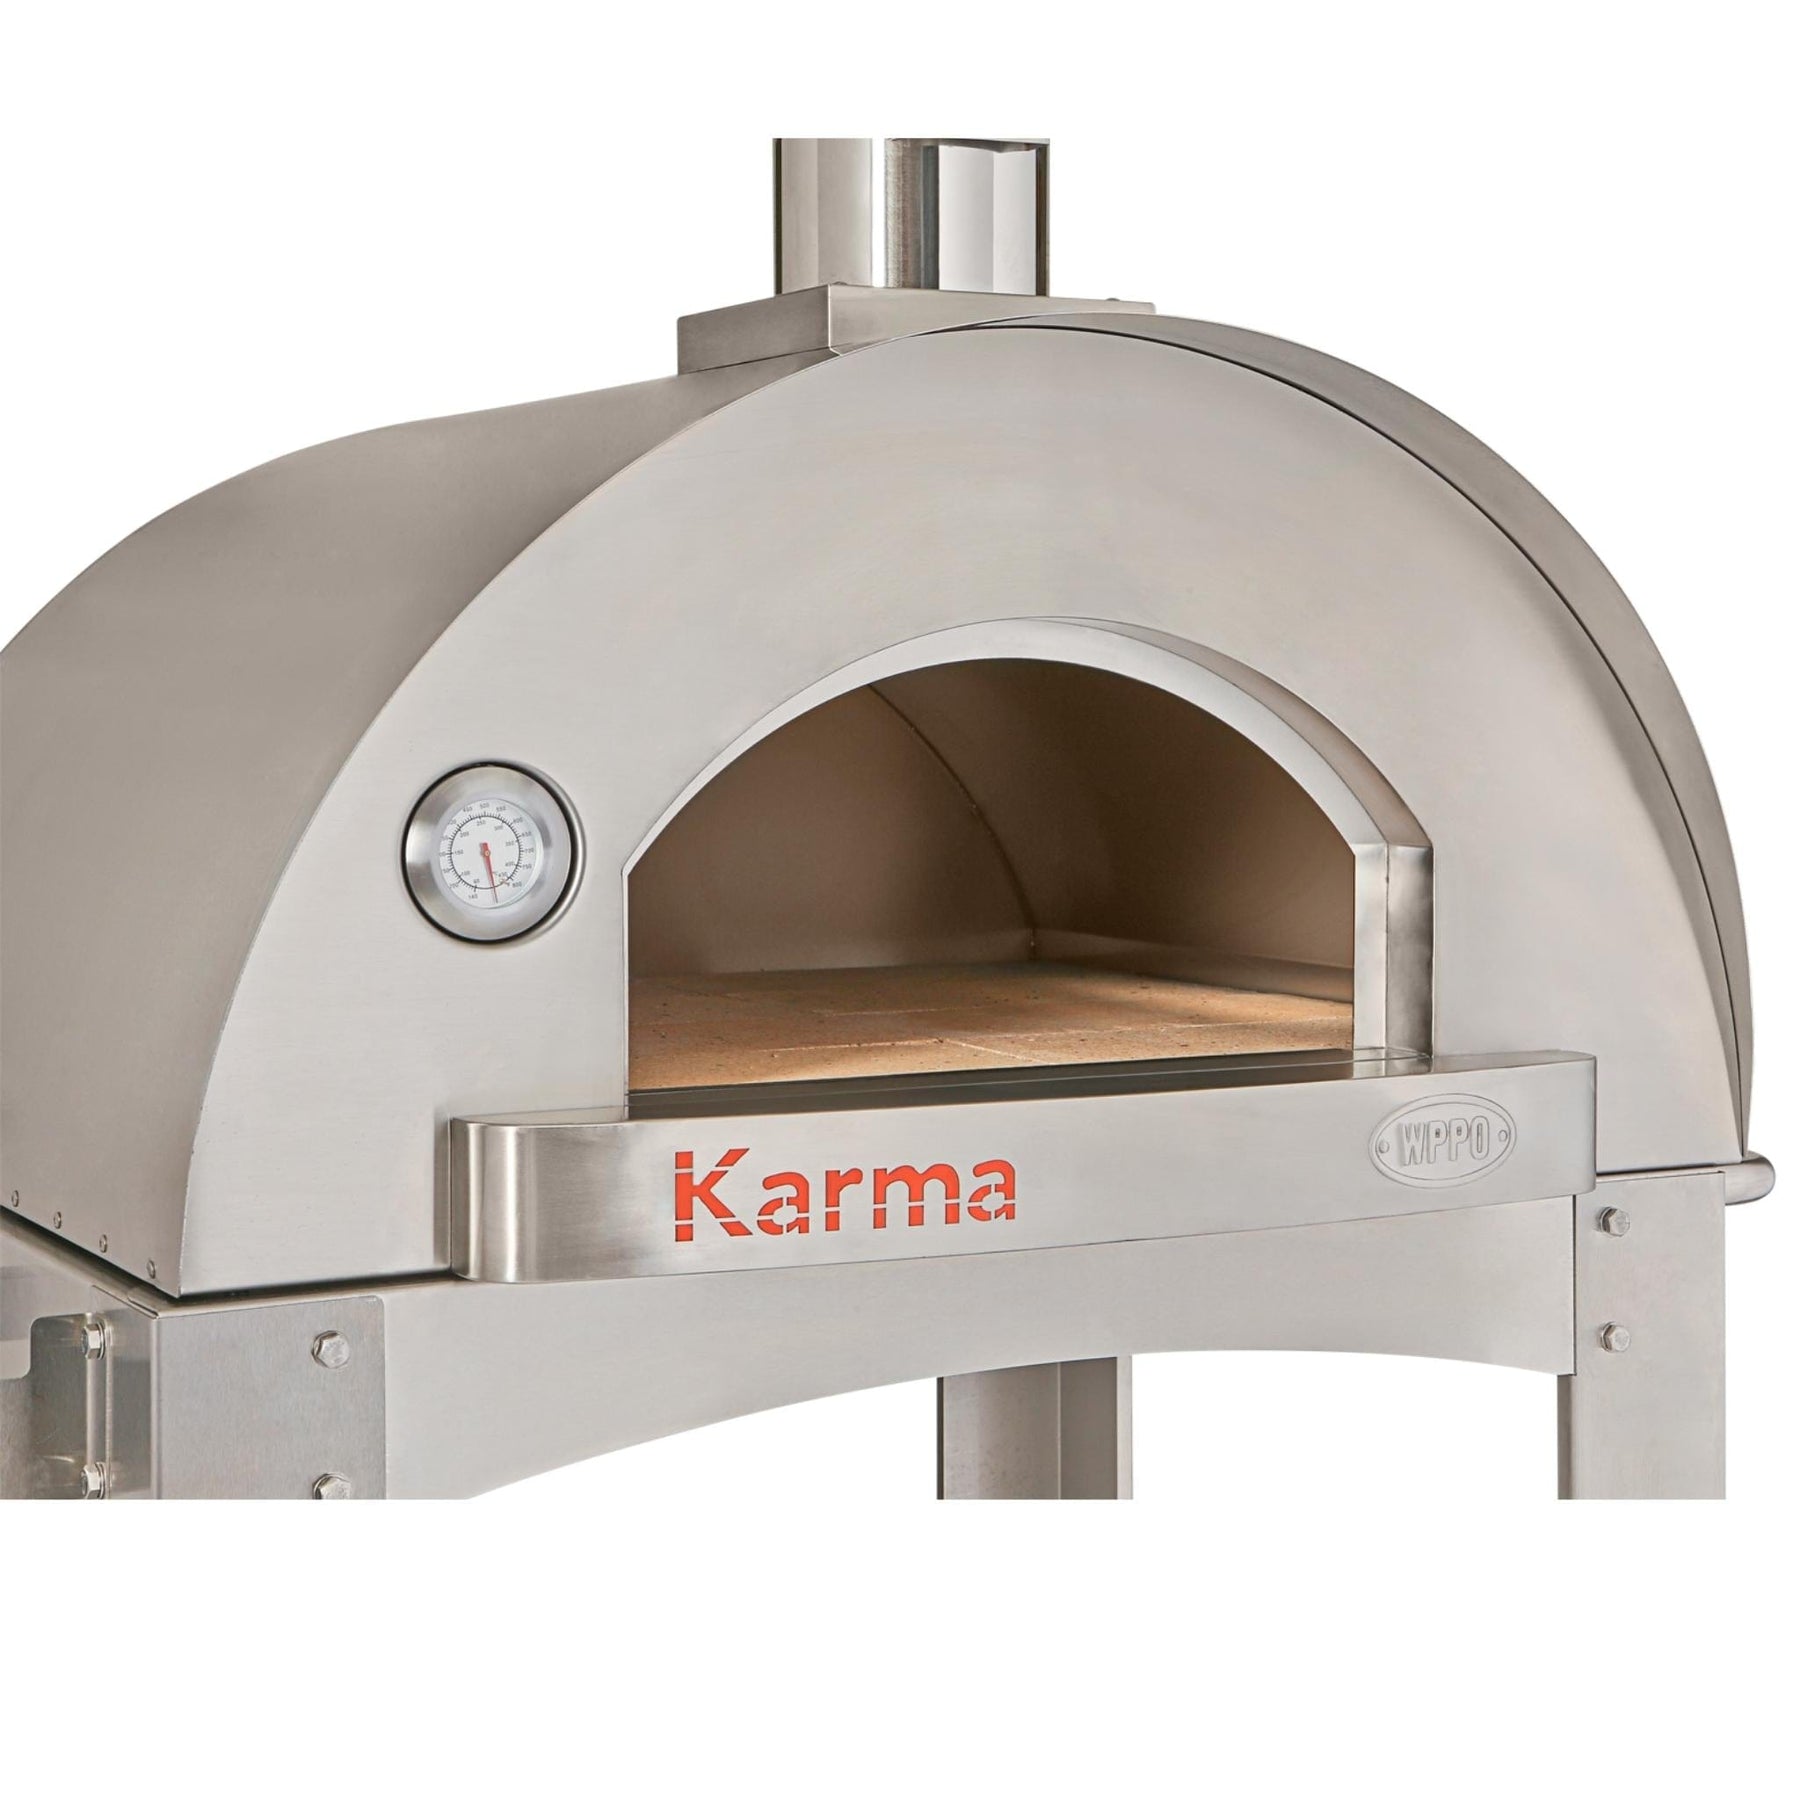 Main image of the WPPO™ Karma 32 Premium Stainless Steel Pizza Oven (SKU: WKK-02S-304SS) with a solid white background